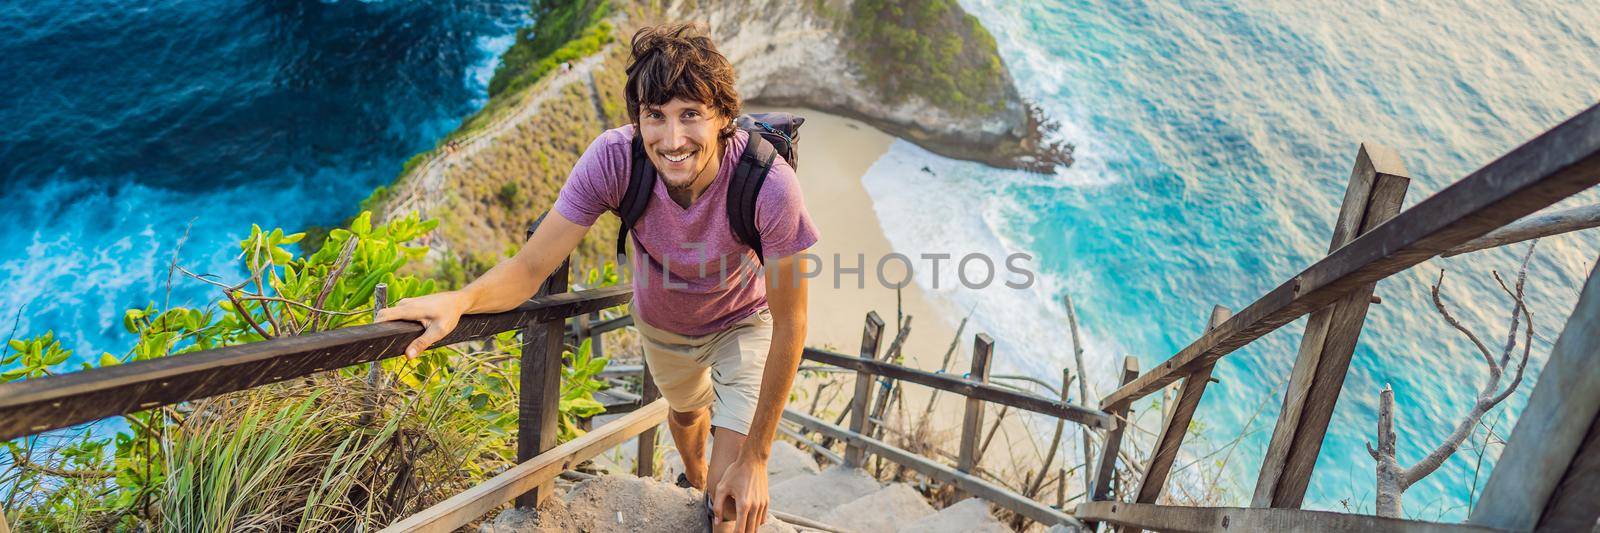 Family vacation lifestyle. Happy man stand at viewpoint. Look at beautiful beach under high cliff. Travel destination in Bali. Popular place to visit on Nusa Penida island. BANNER, LONG FORMAT